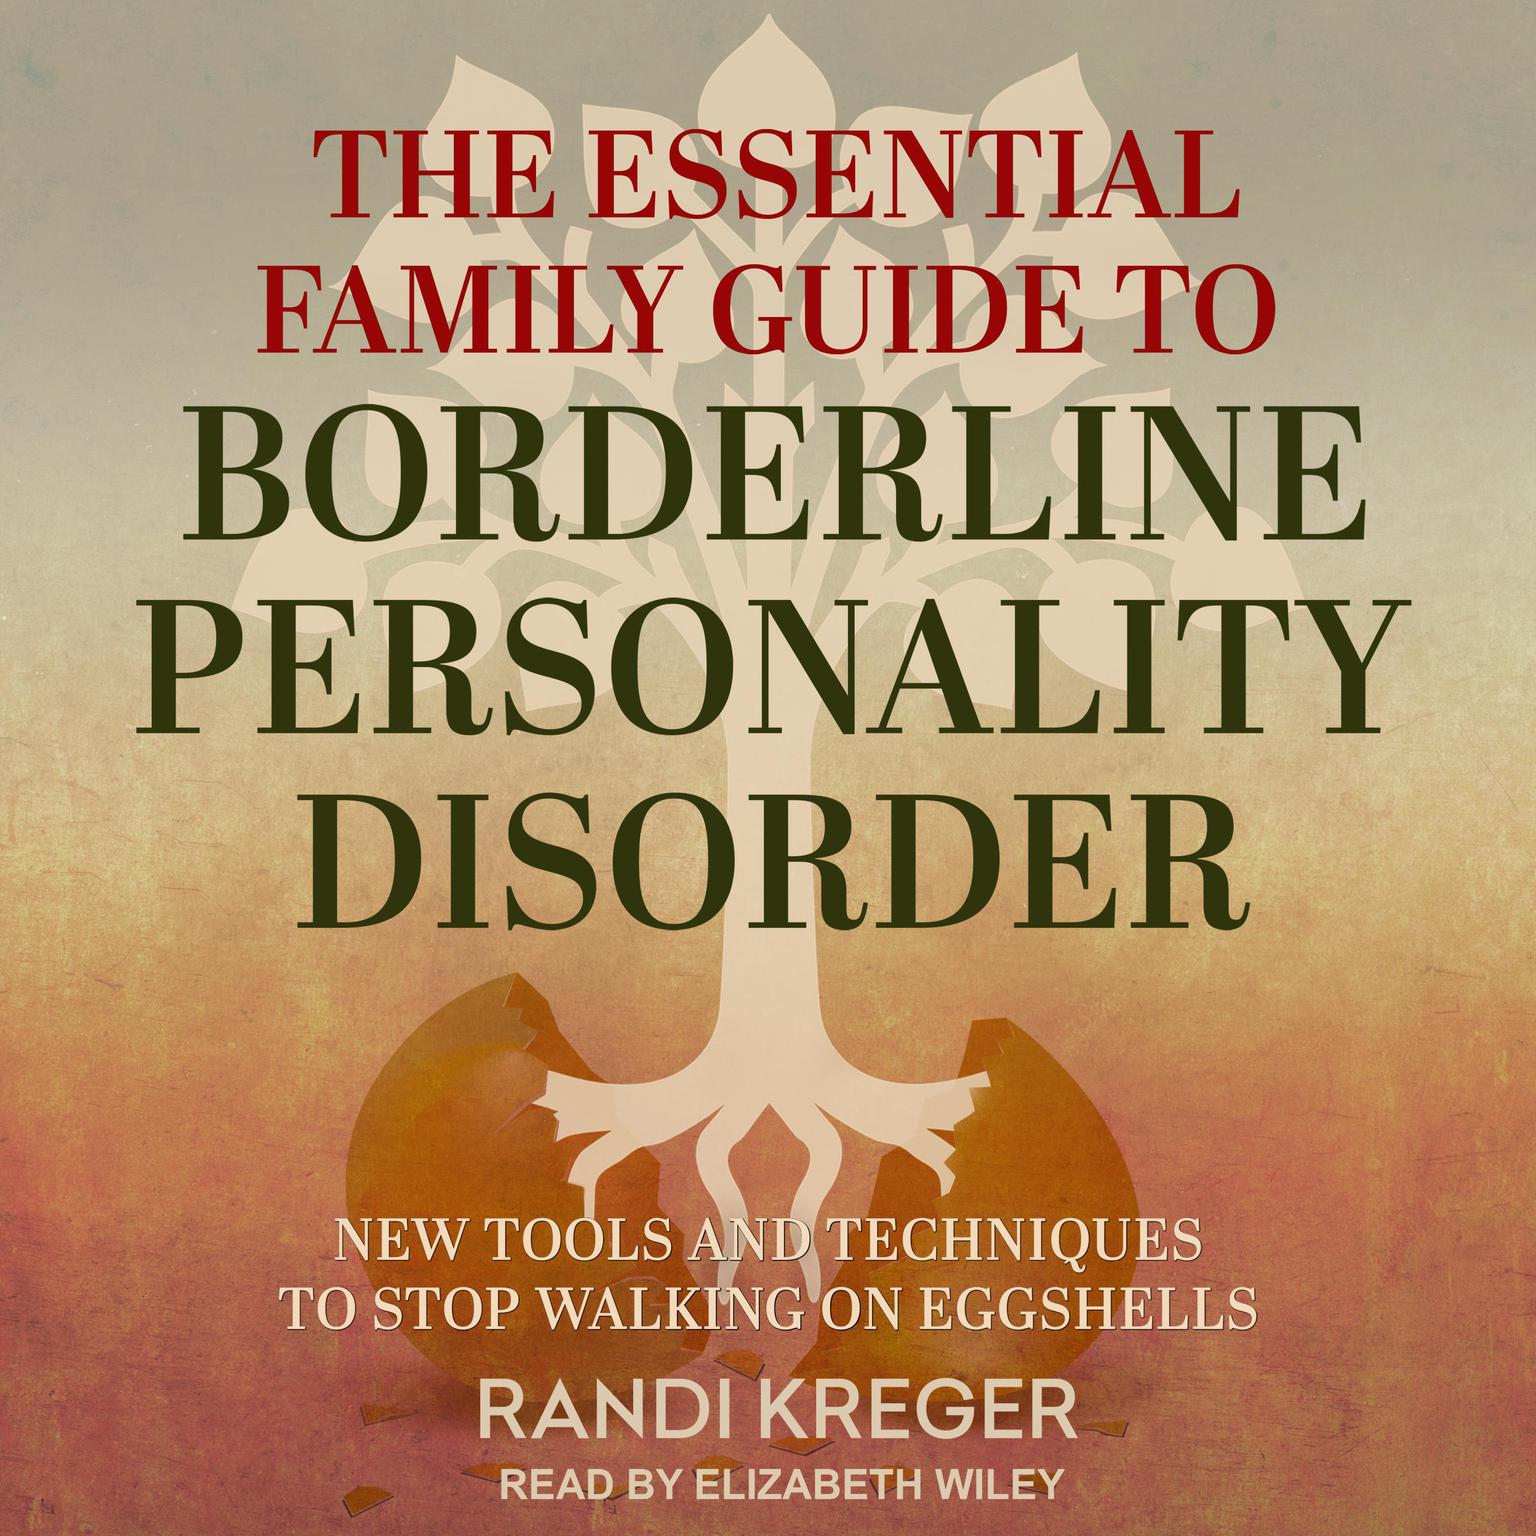 The Essential Family Guide to Borderline Personality Disorder: New Tools and Techniques to Stop Walking on Eggshells Audiobook, by Randi Kreger